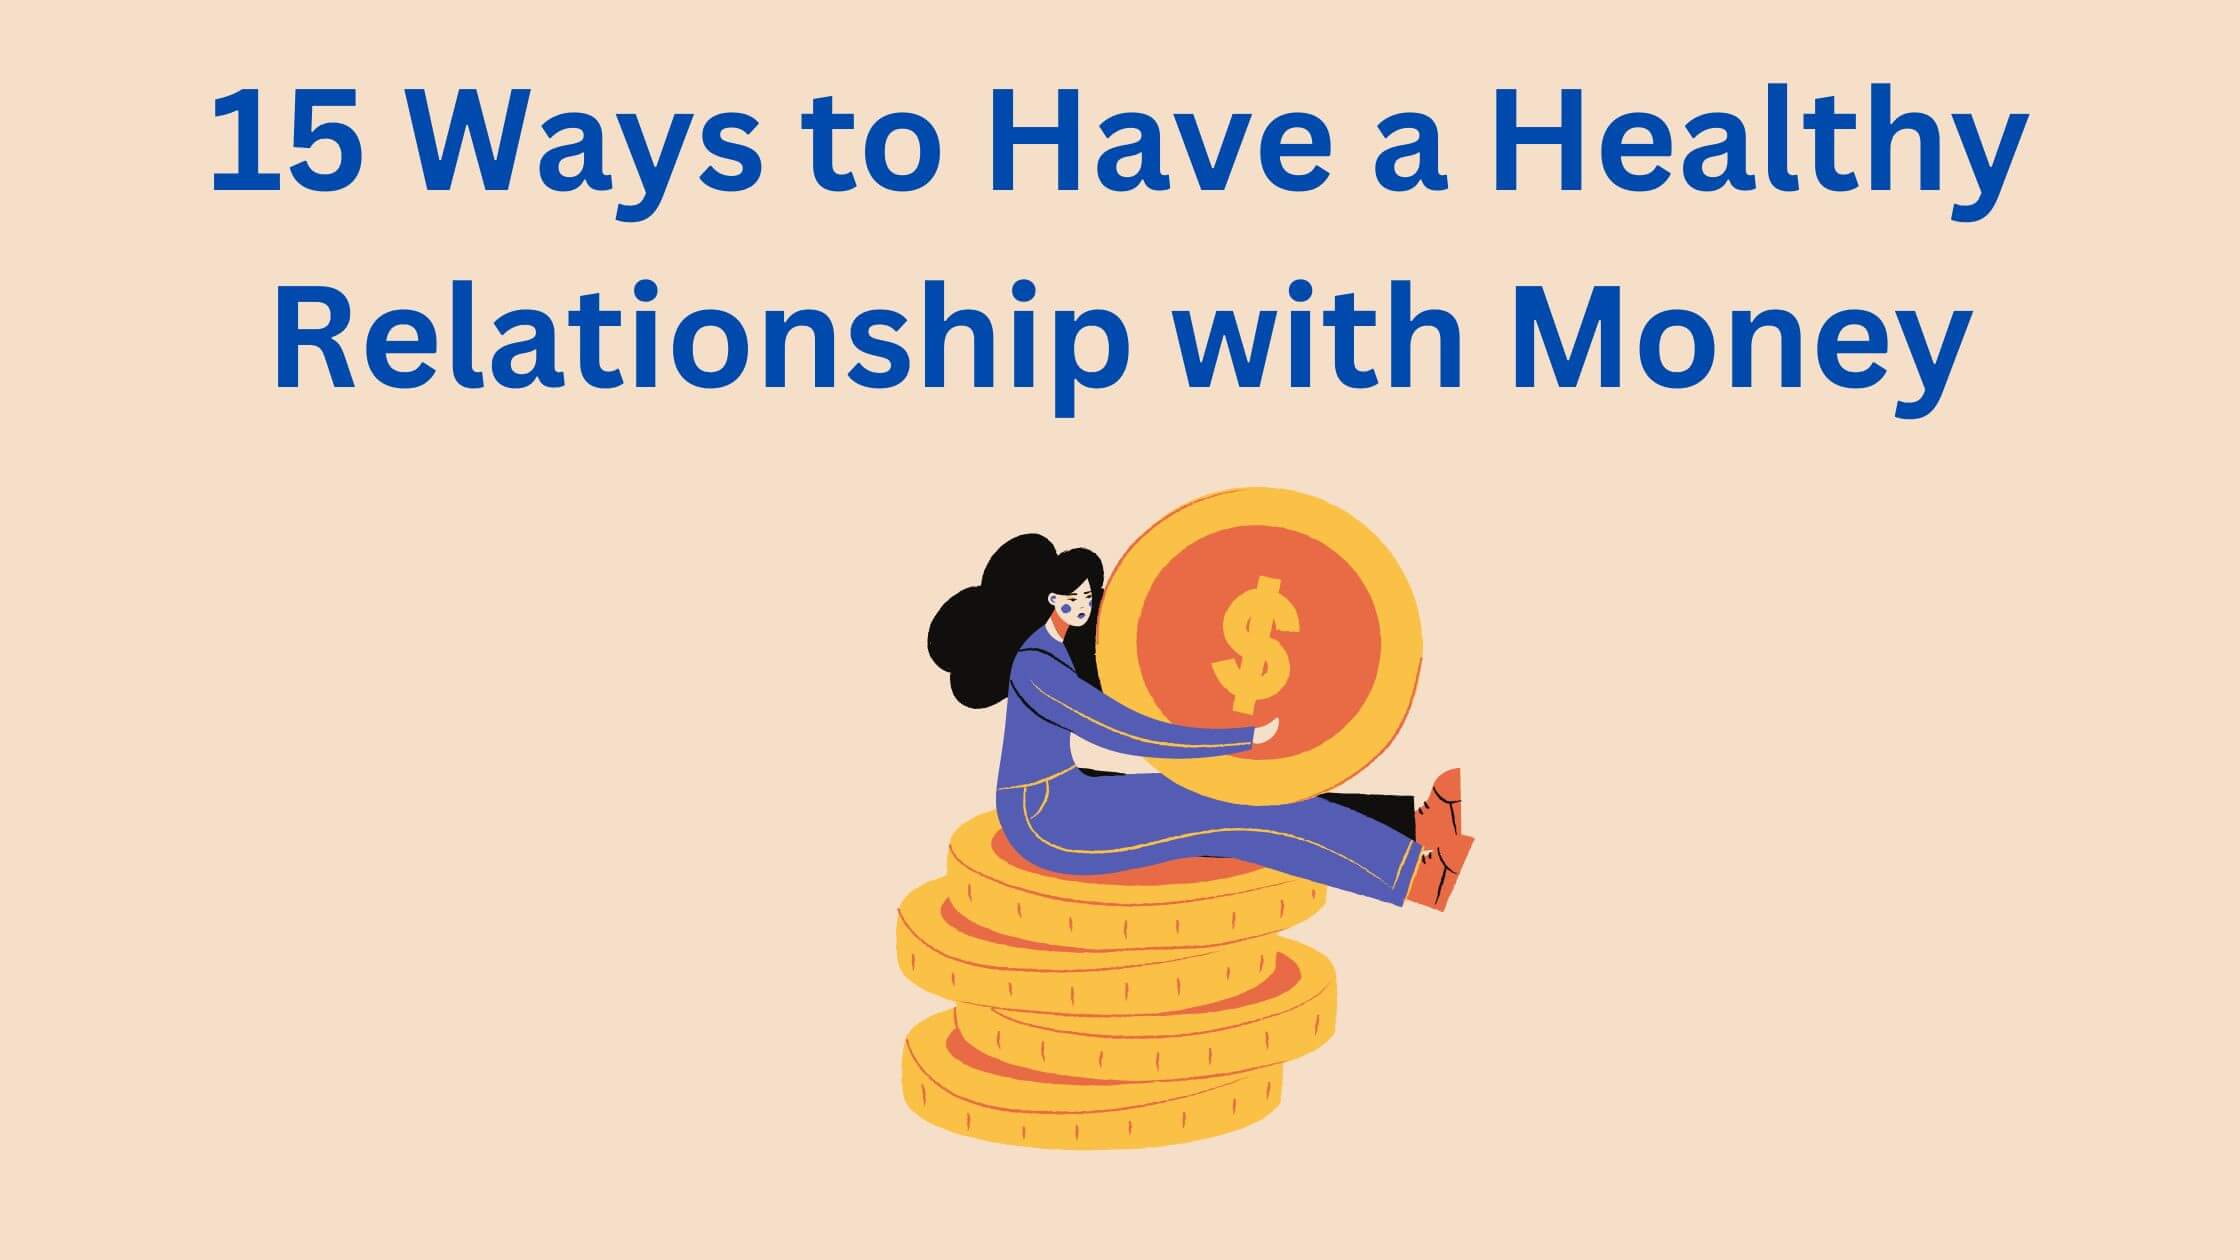 15 tips to develop a healthy relationship with money